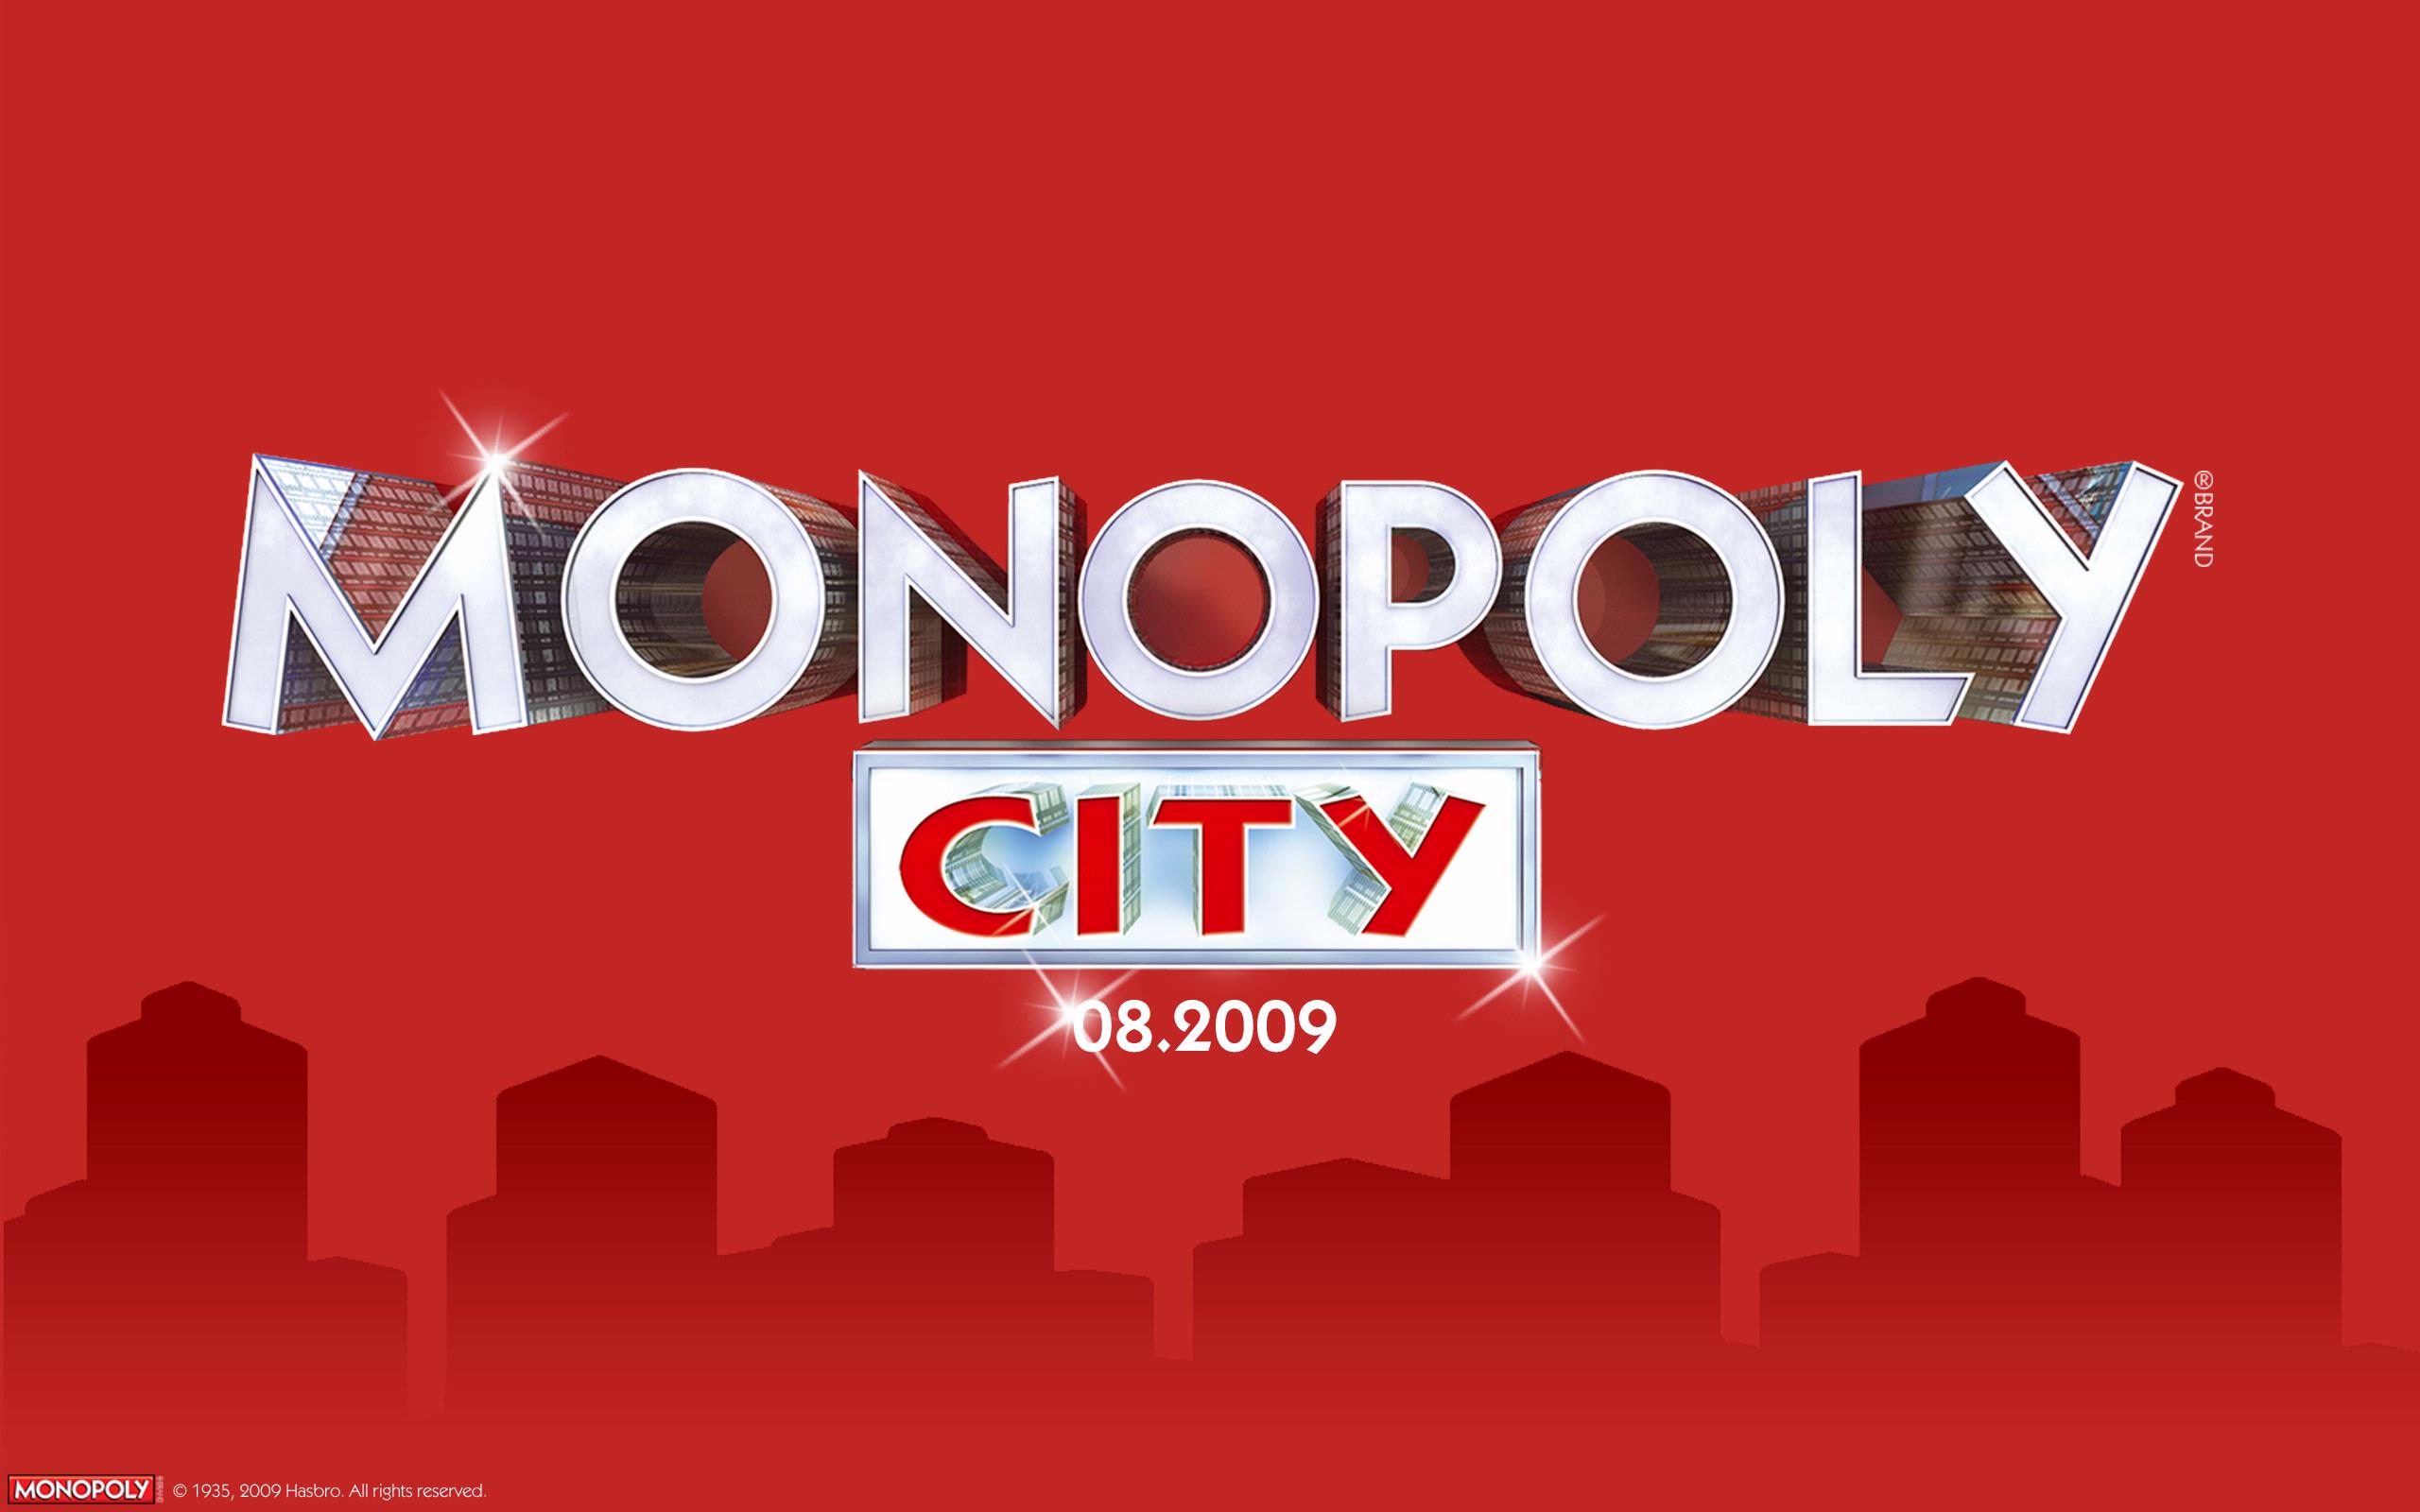  Monopoly HQ Background Images